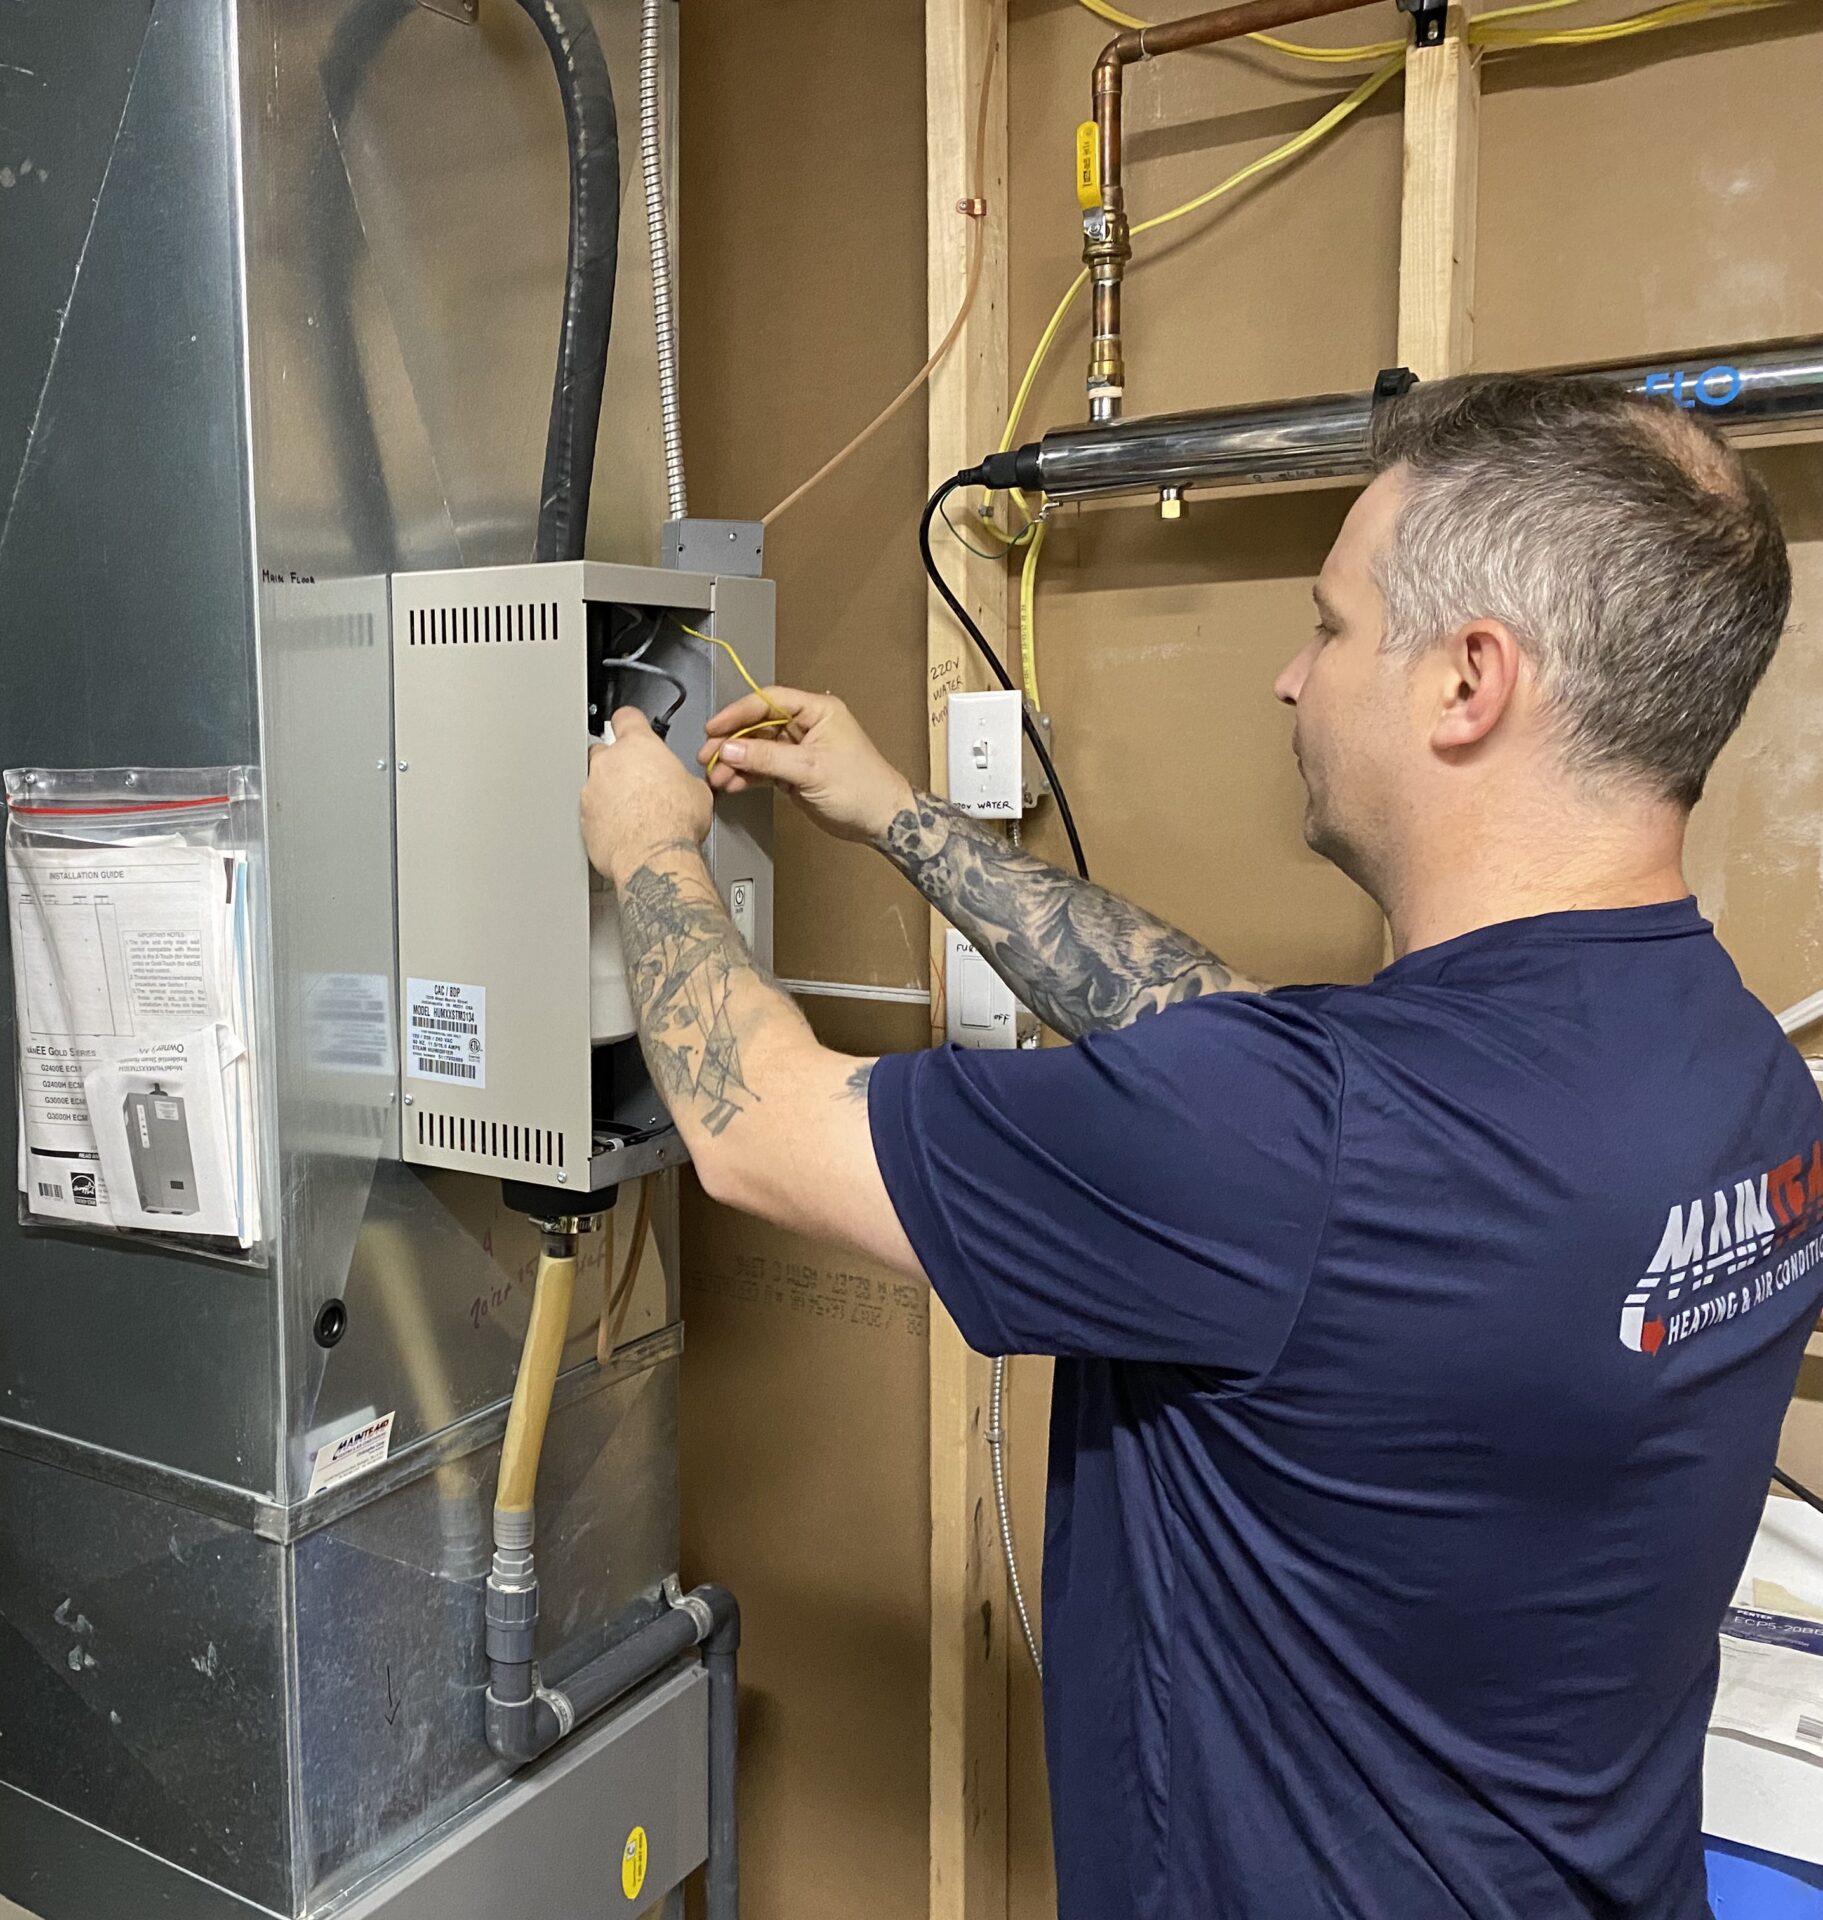 A person with tattoos is working on electrical components within a heating ventilation and air conditioning (HVAC) unit in a utility space.